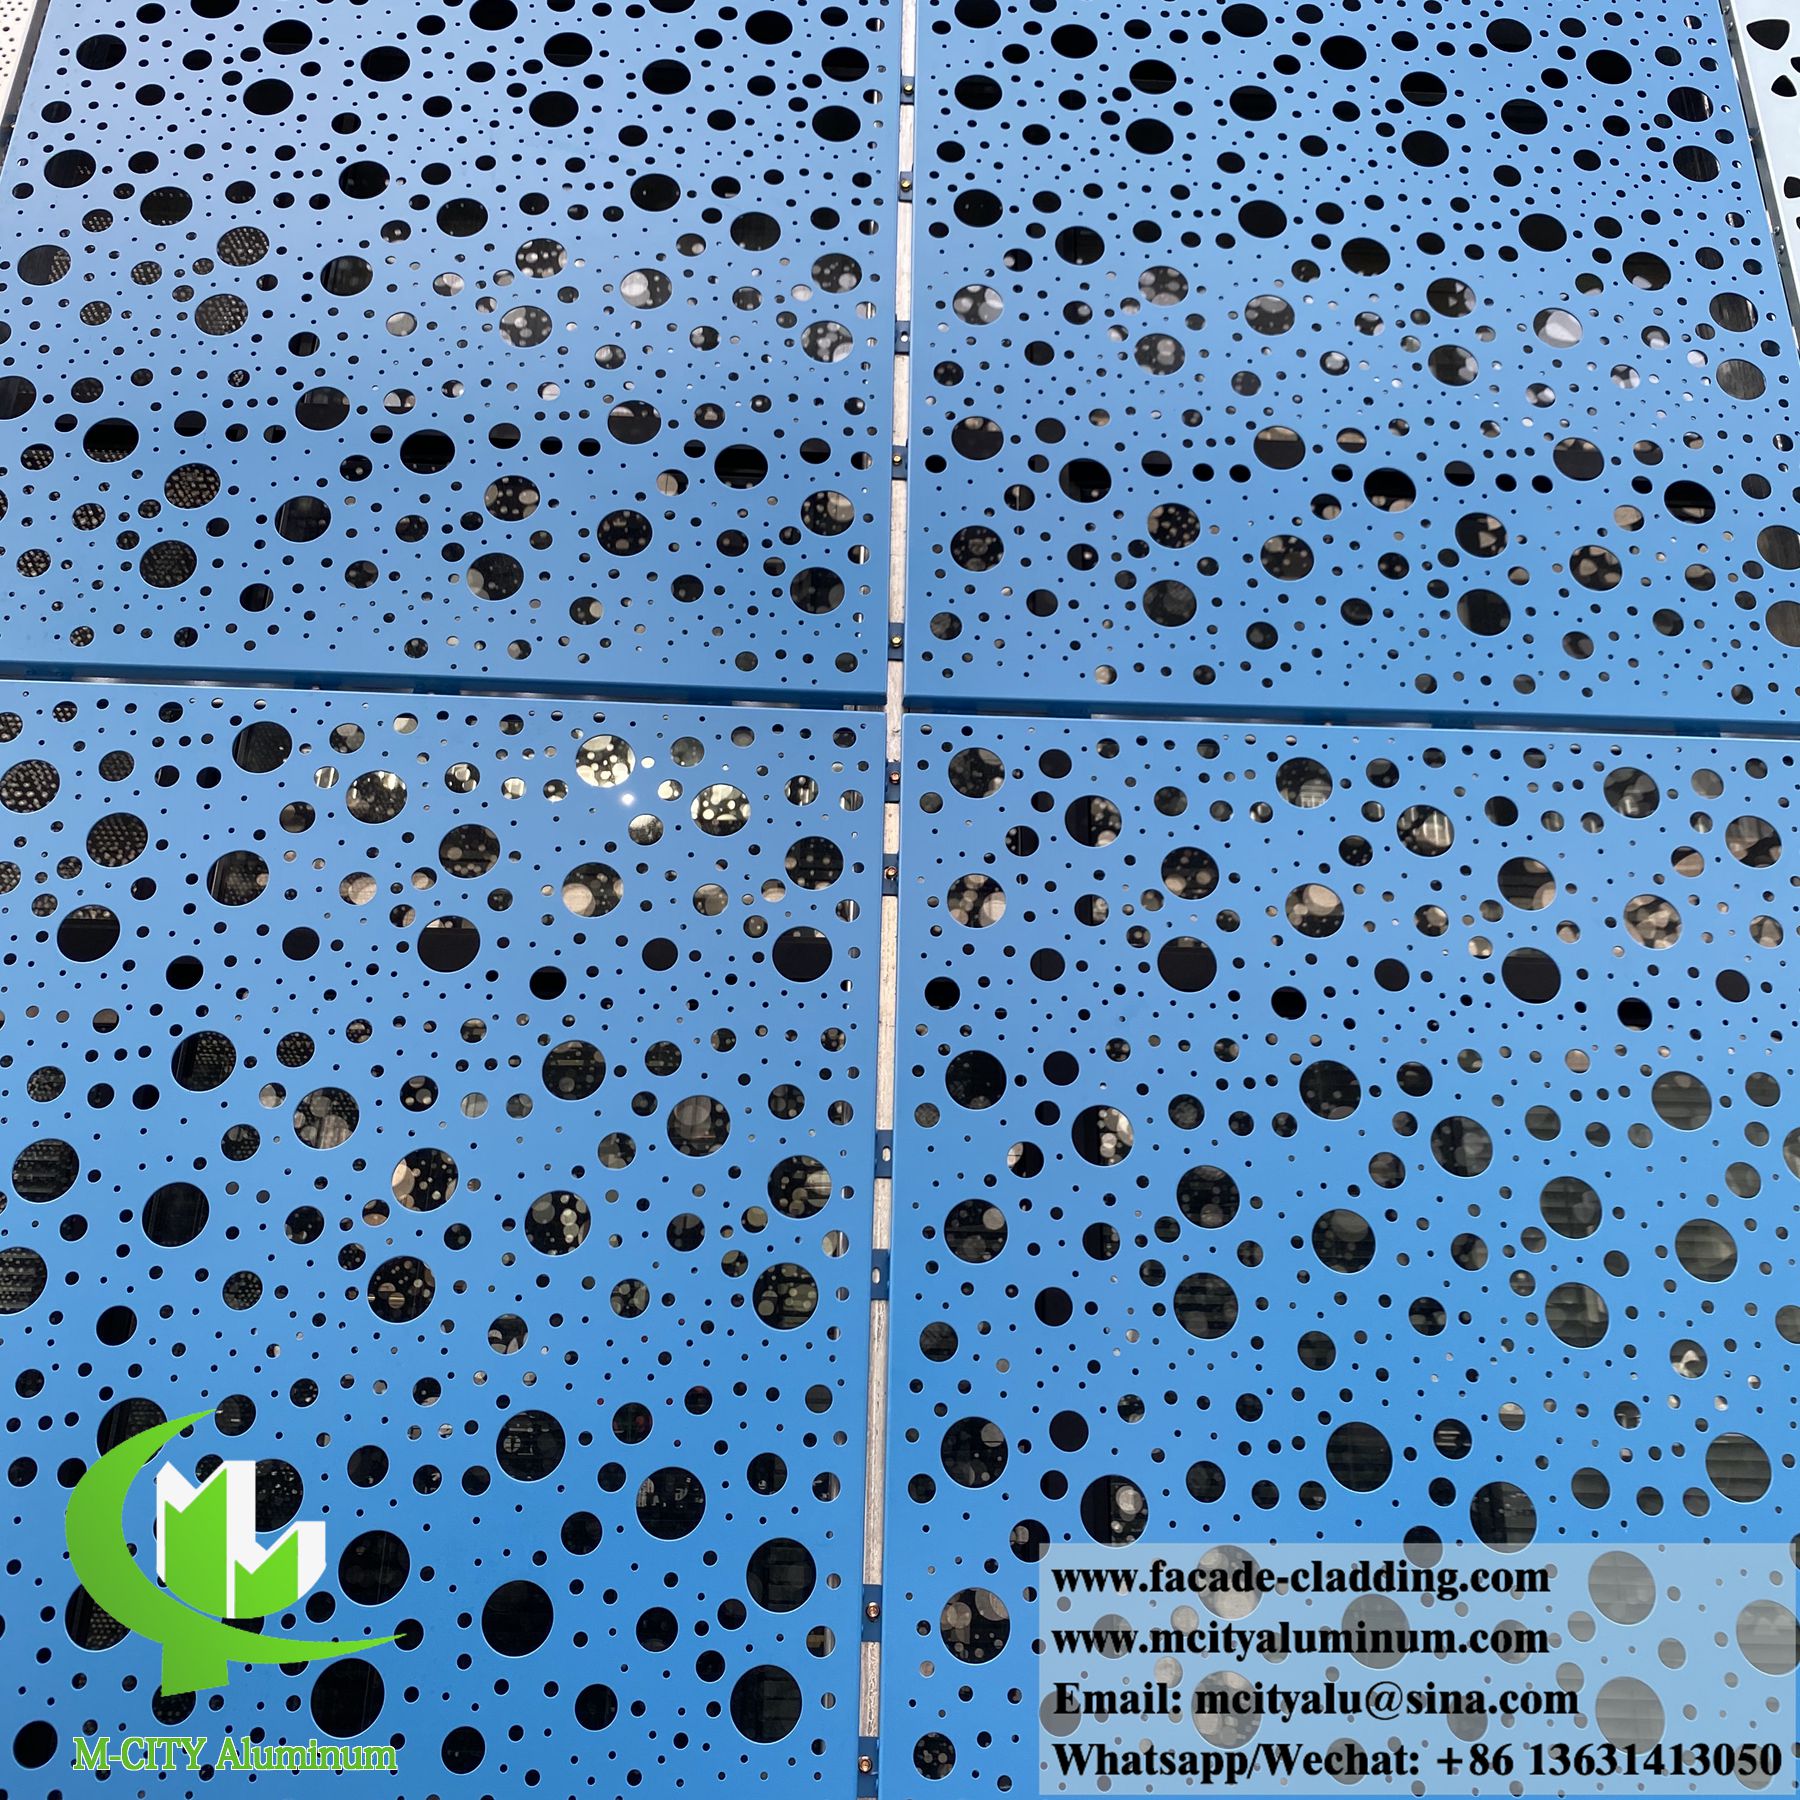 Laser cut metal facade aluminum screen for wall cladding PVDF coating with perforated design